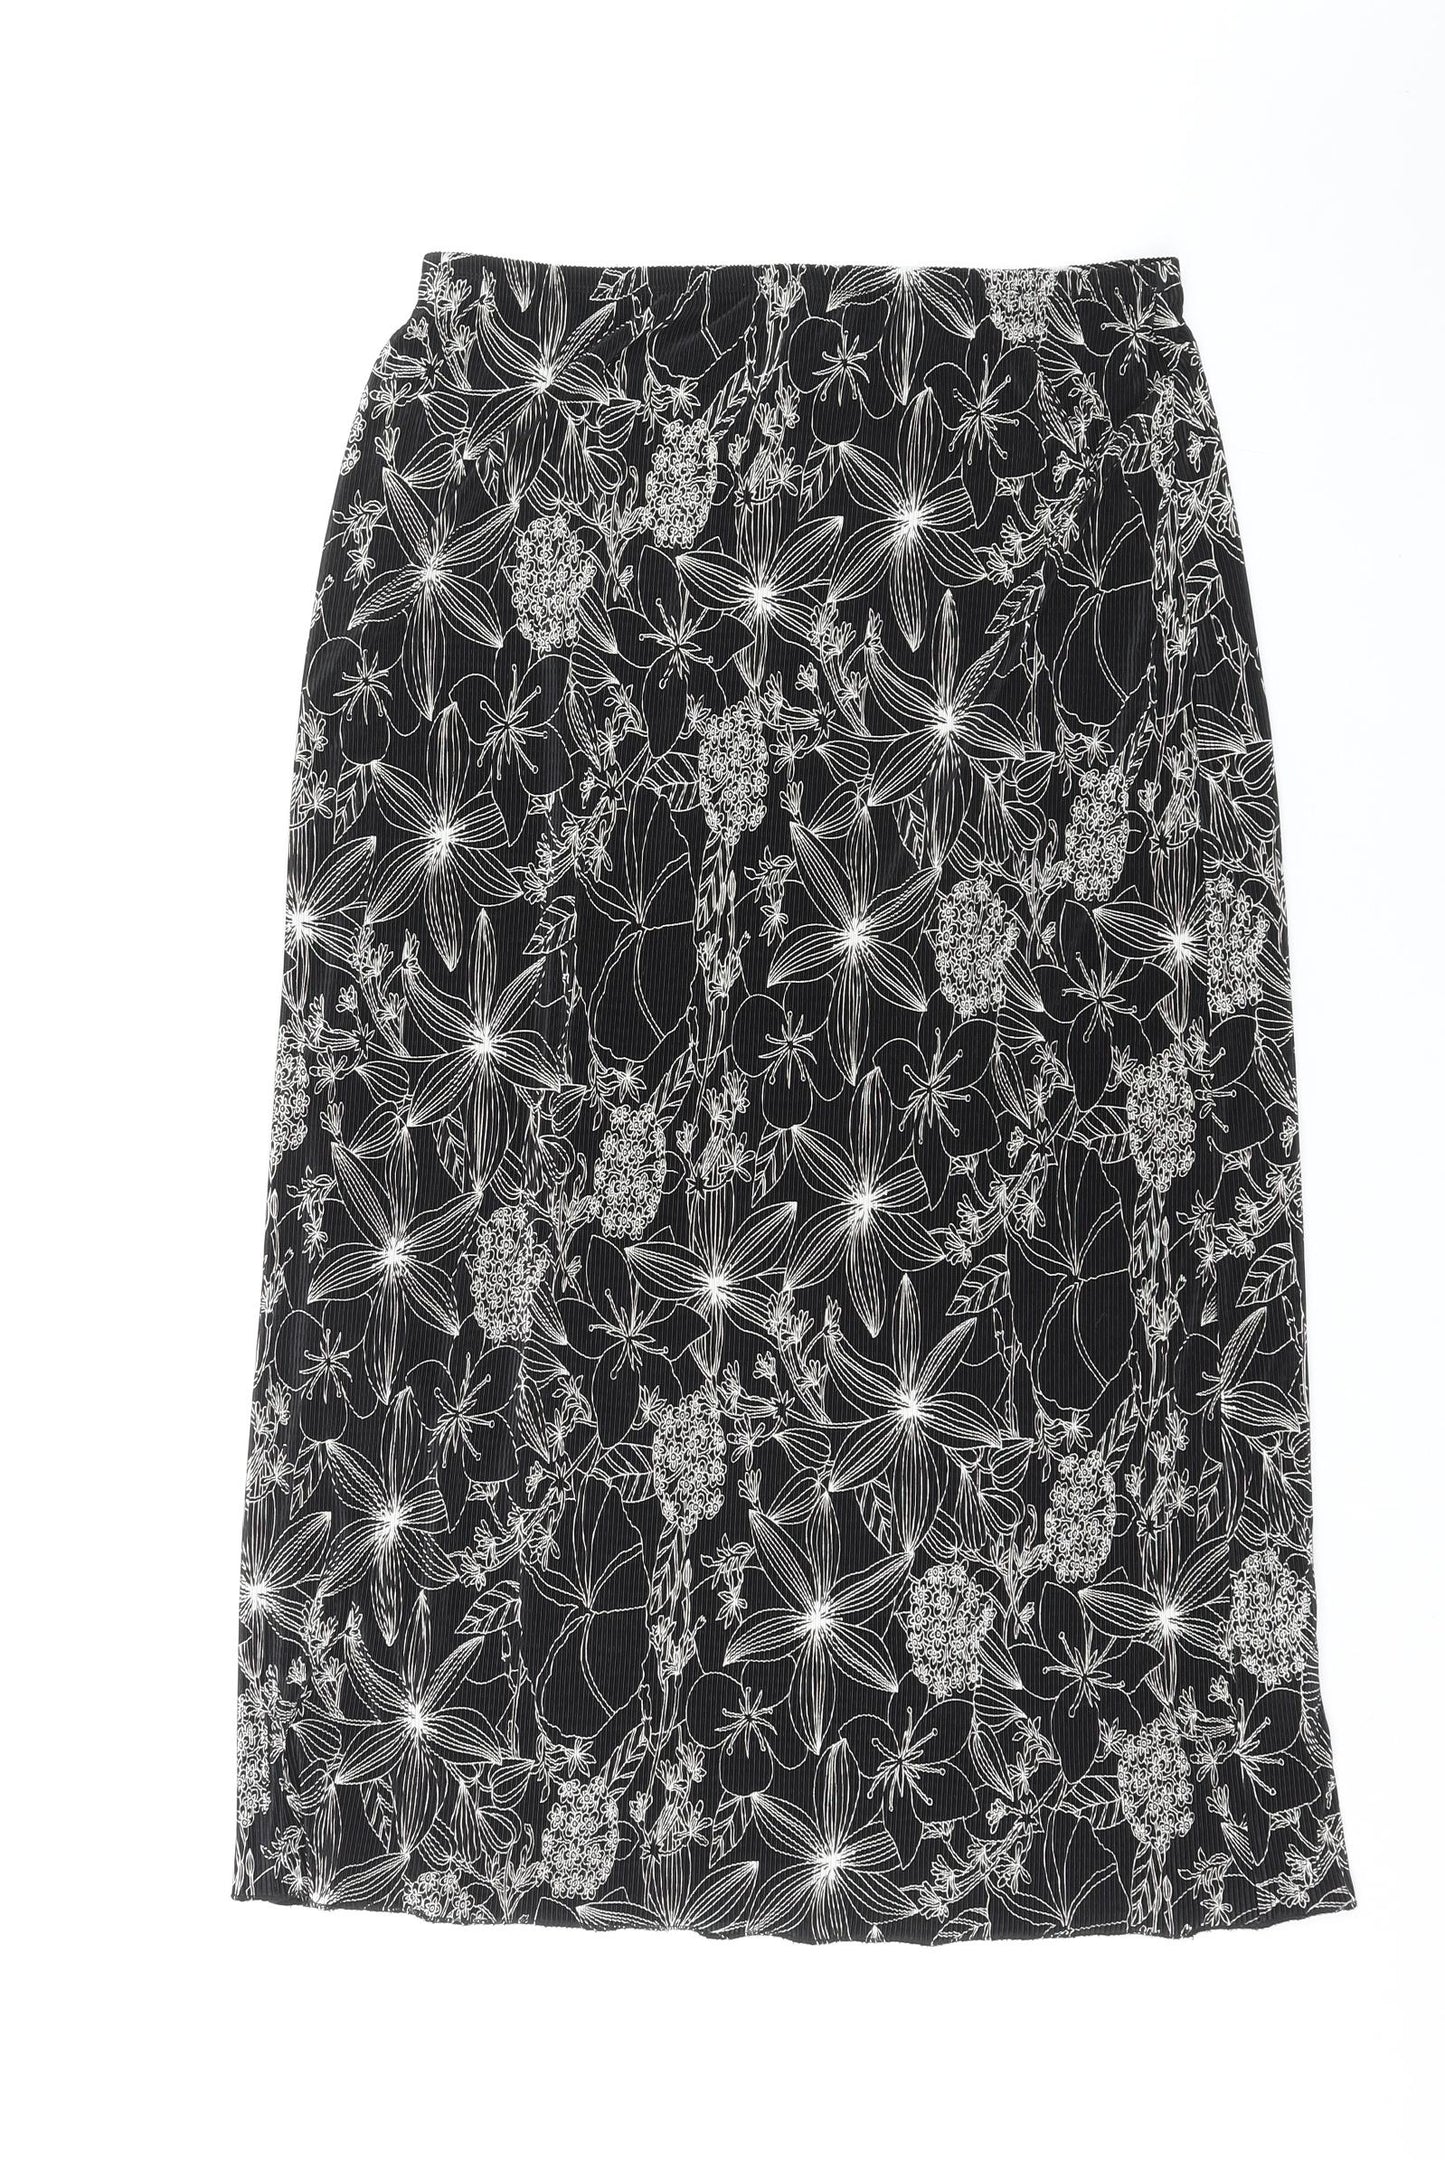 NEXT Womens Black Floral Polyester A-Line Skirt Size 14